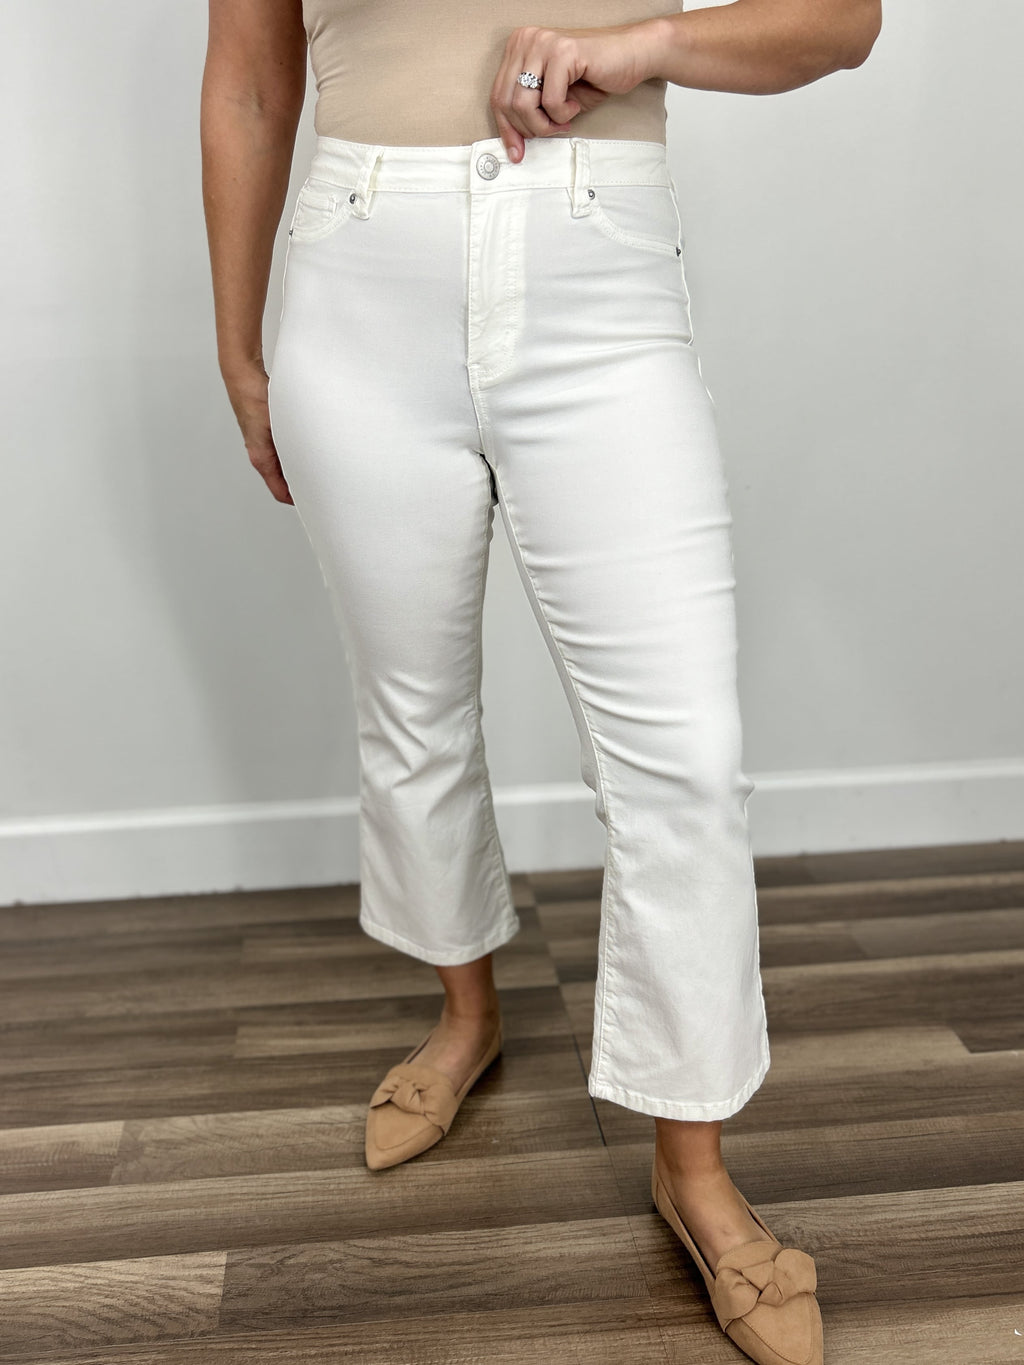 Women's Wyatt Stretchy Cropped Flare Pants in white.